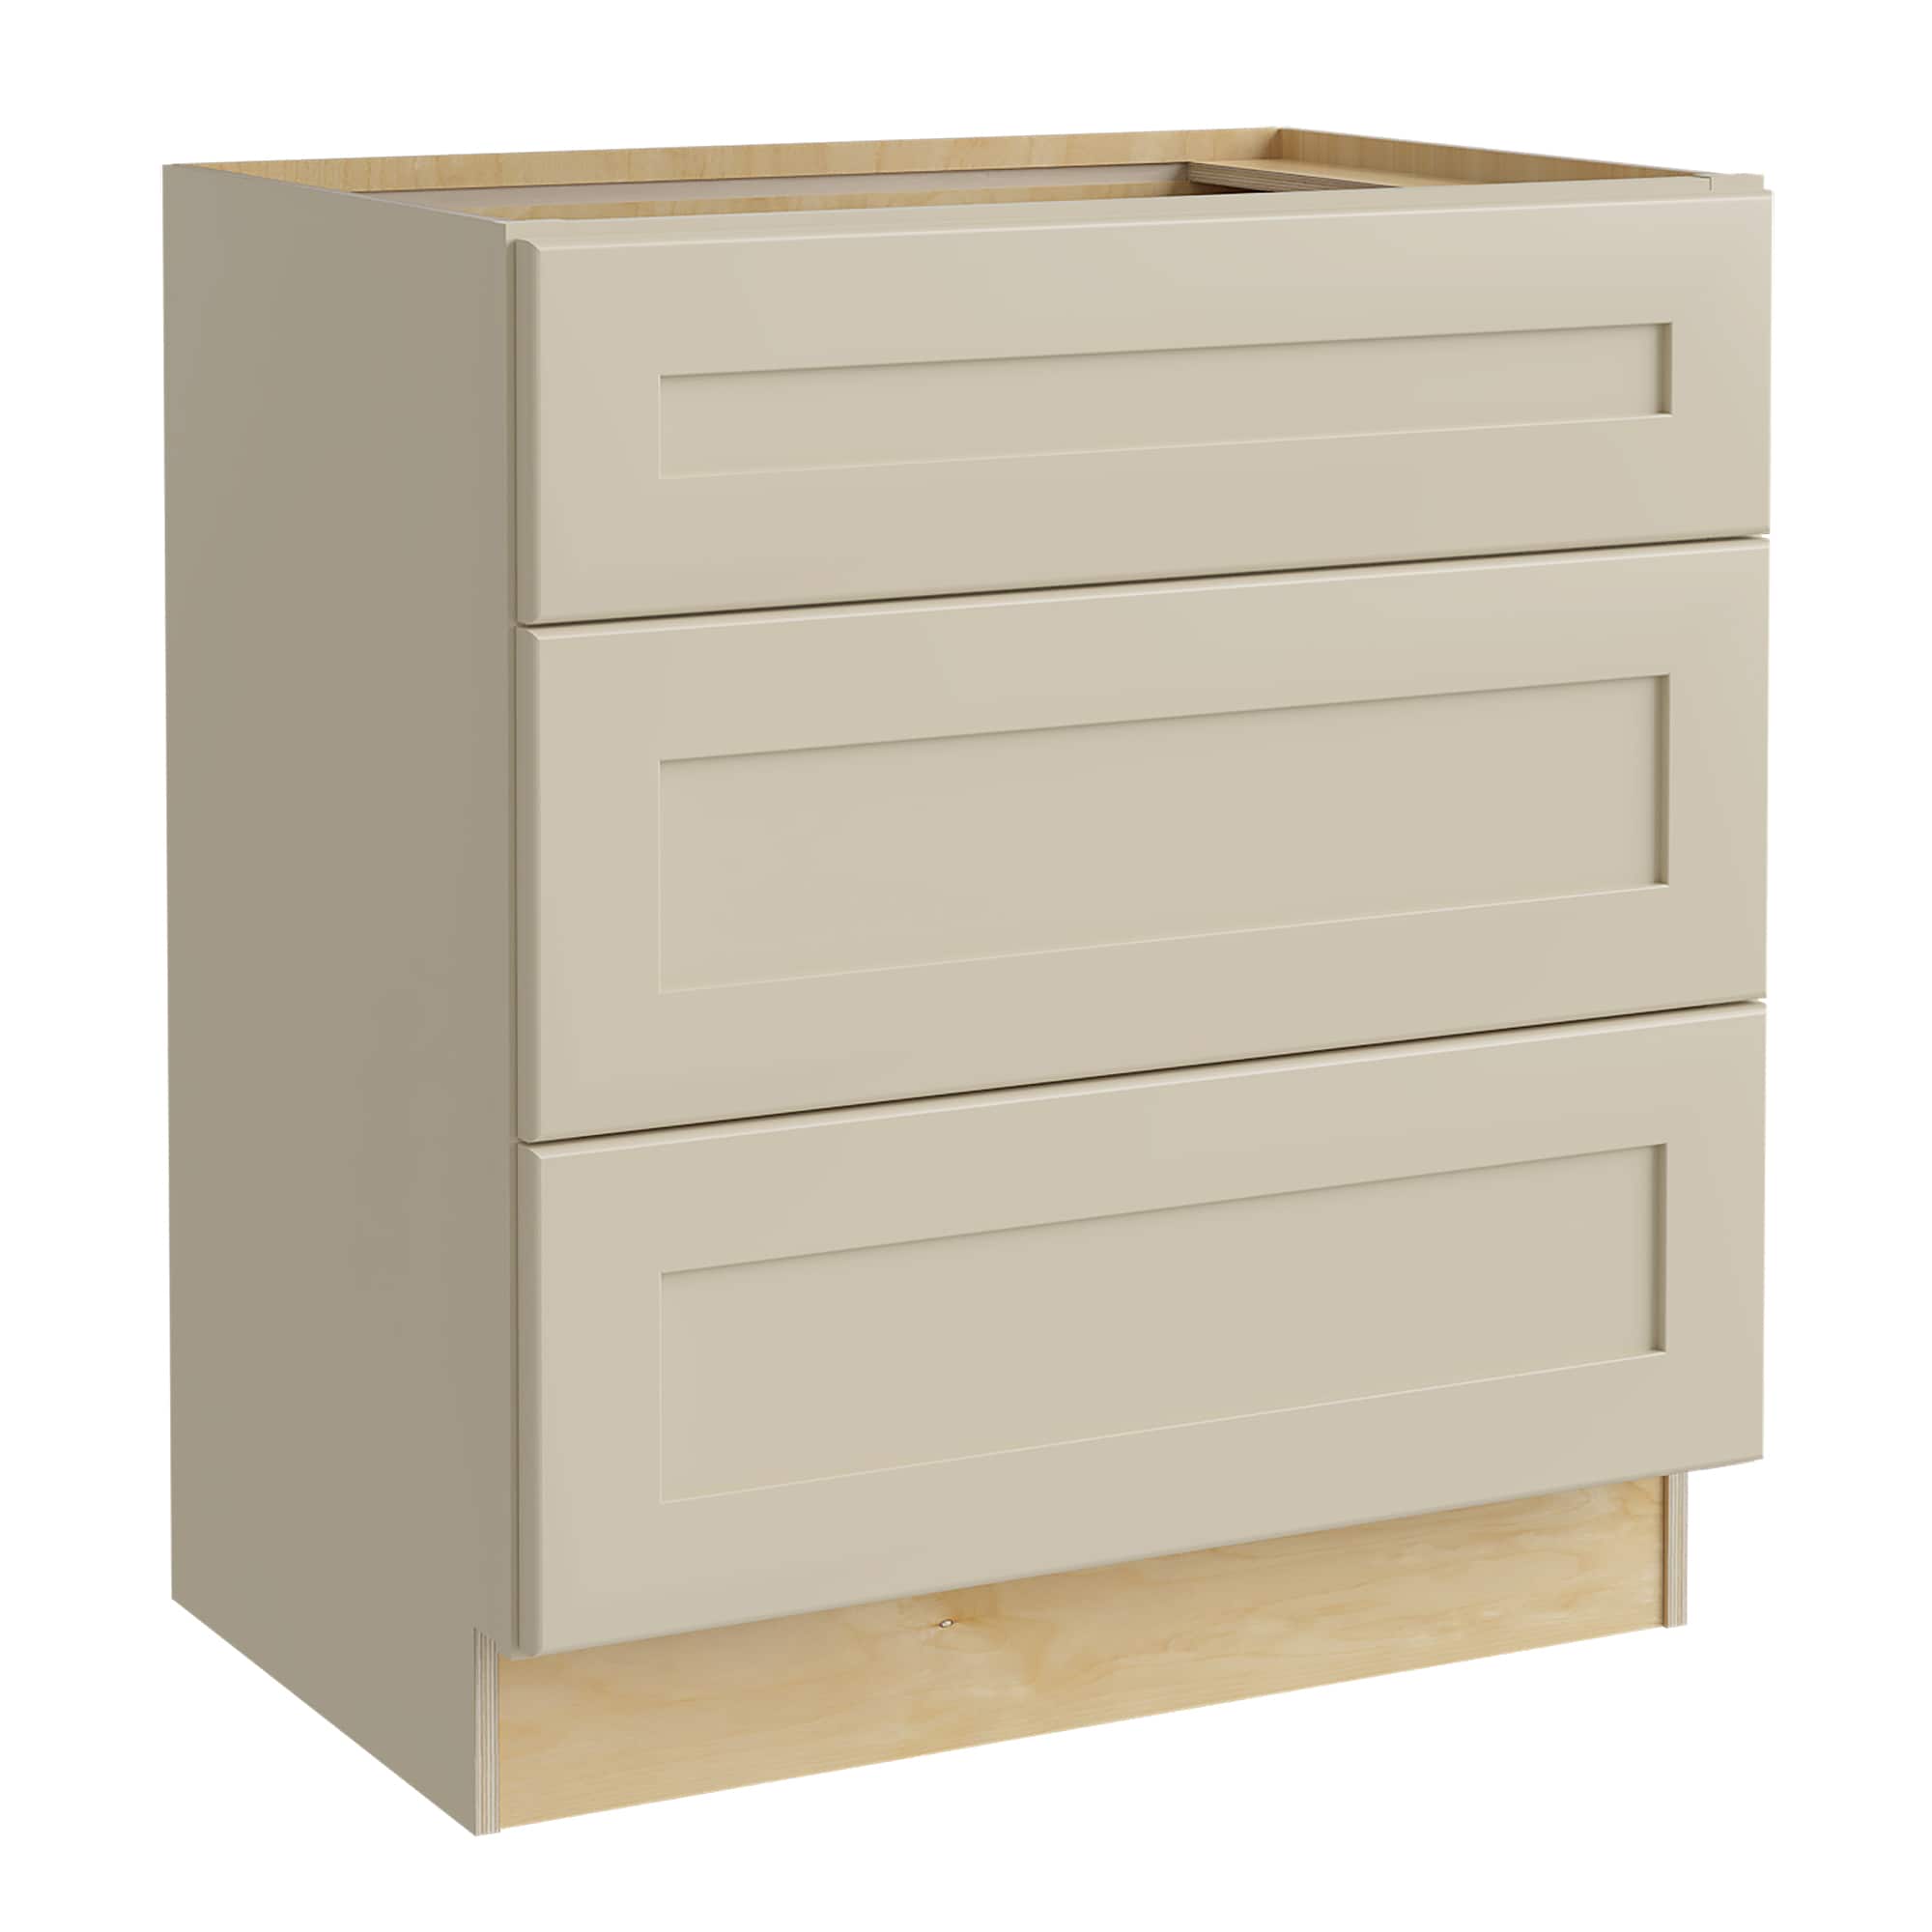 Luxxe Cabinetry 24-in W x 34.5-in H x 24-in D Norfolk Blended Cream Painted Drawer Base Fully Assembled Semi-custom Cabinet in Off-White | BD24-NBC